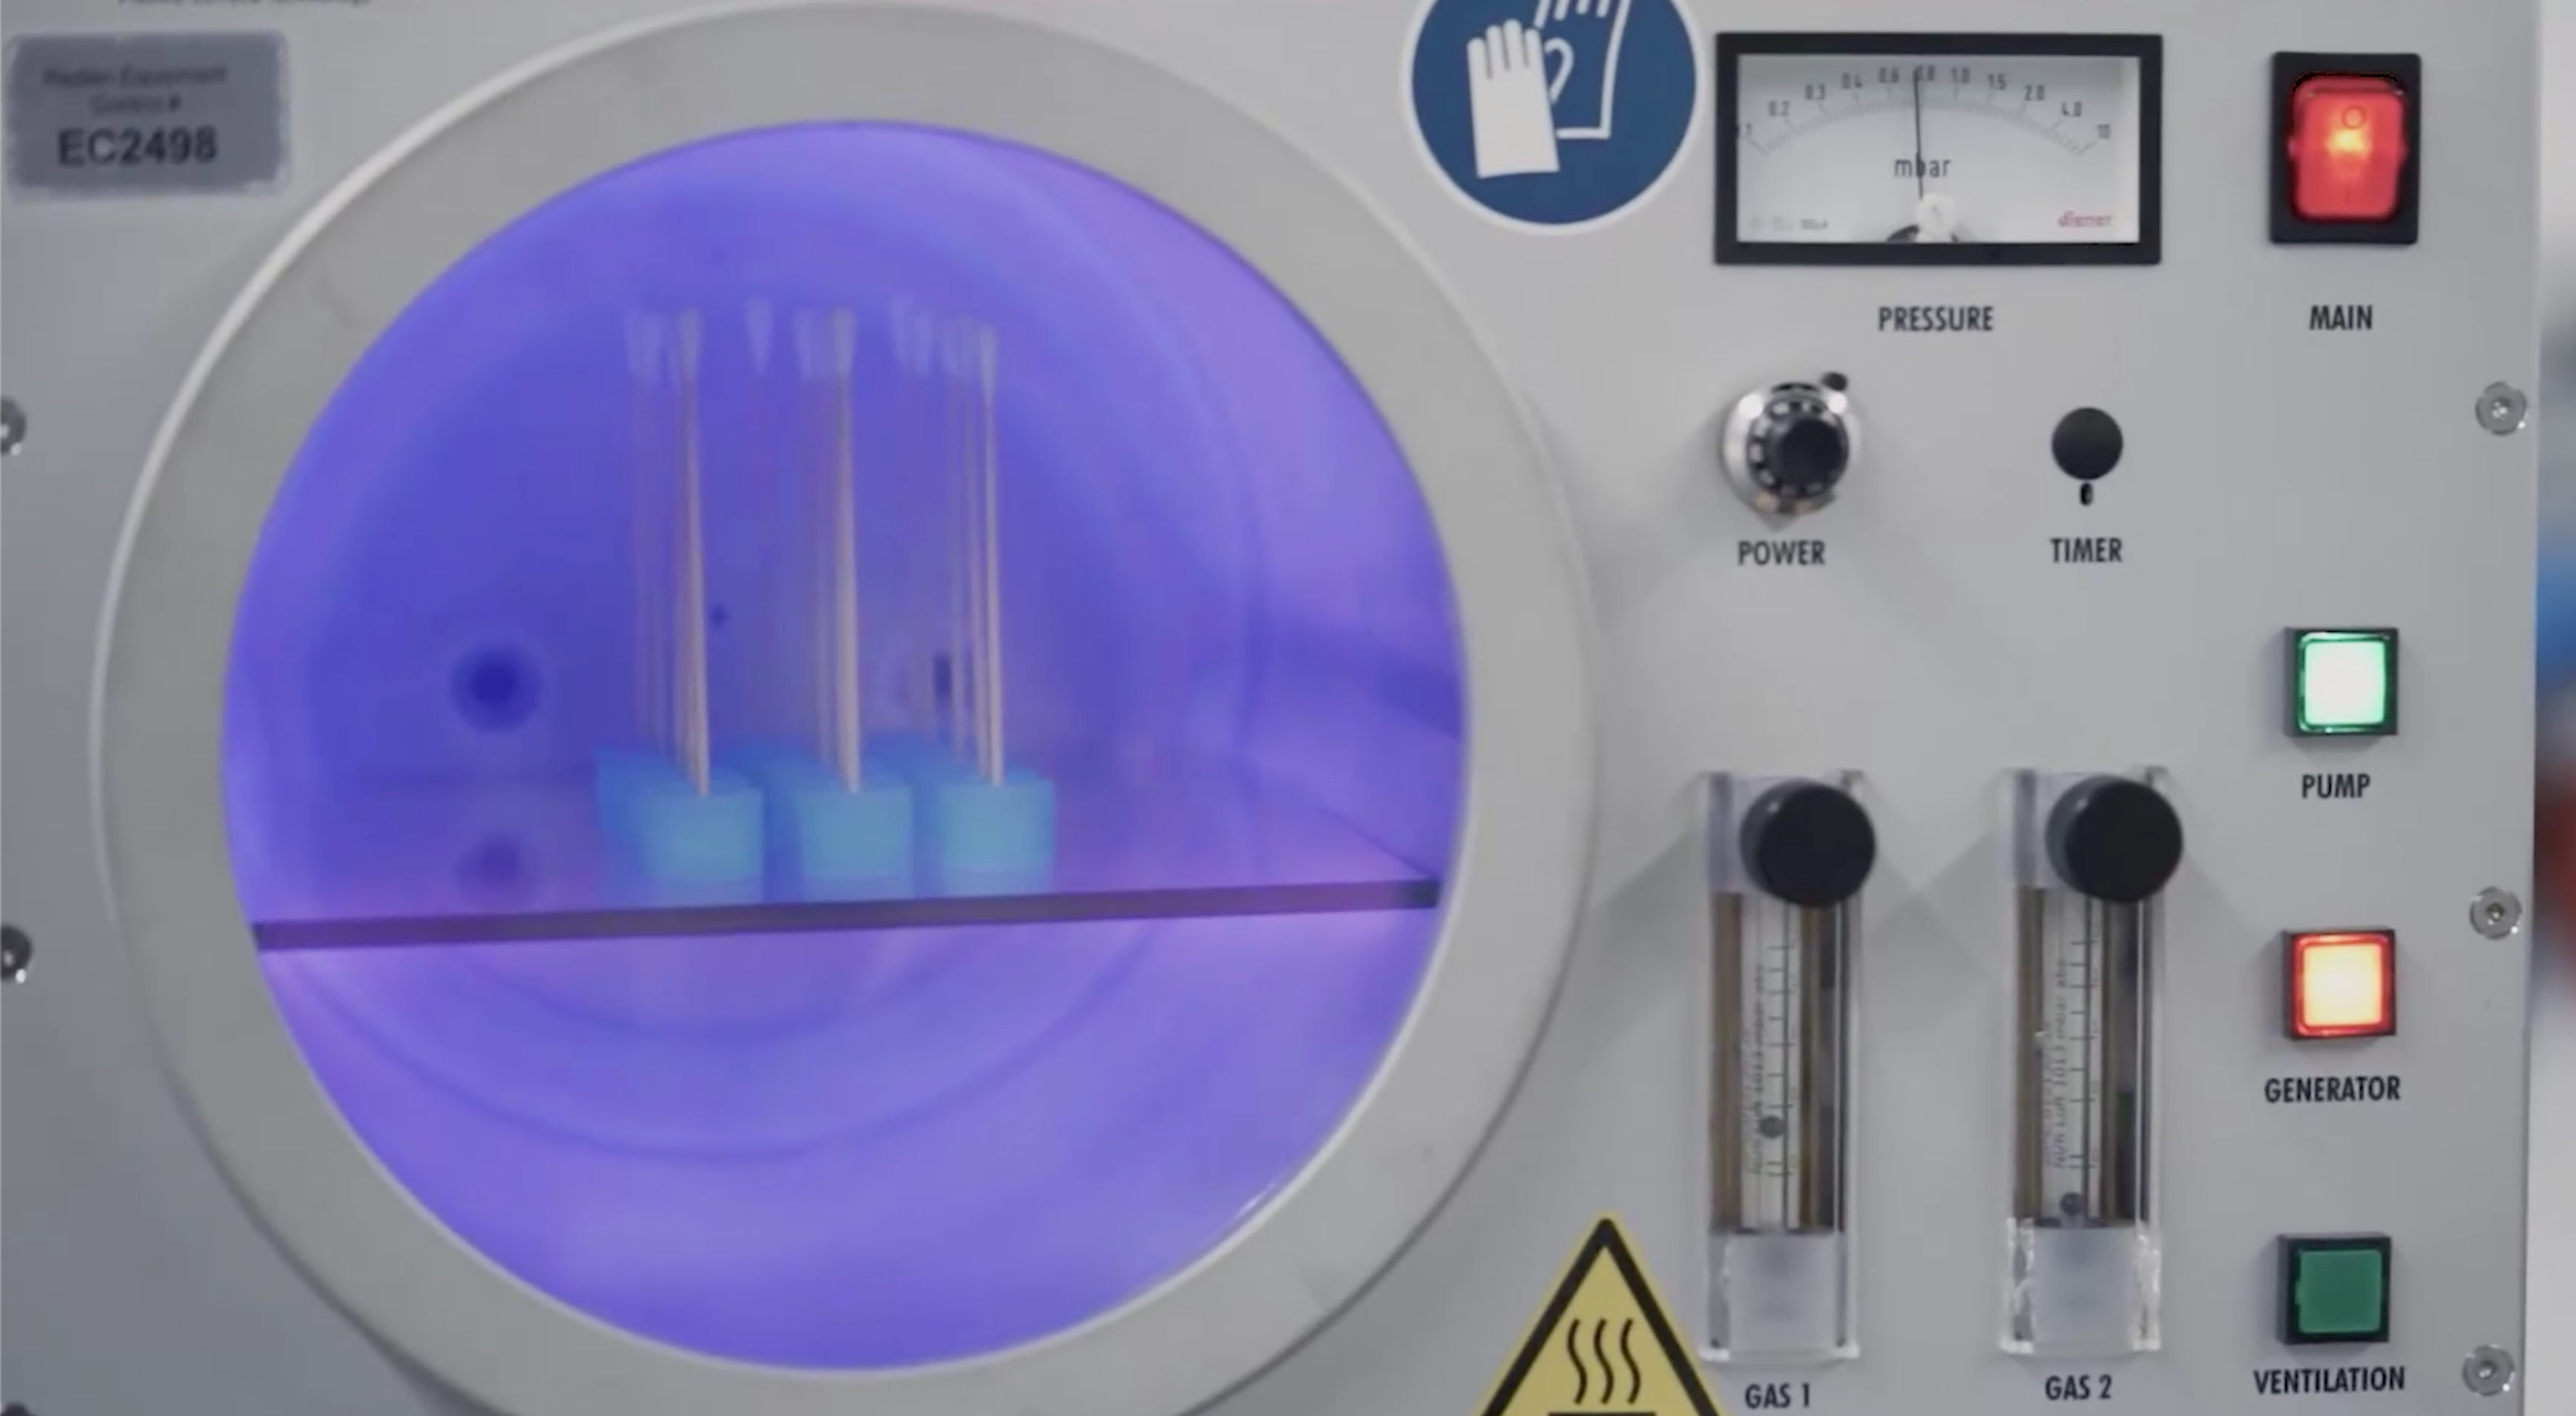 How wide is the cleaning treatment with Plasma? (Atmospheric pressure plasma)